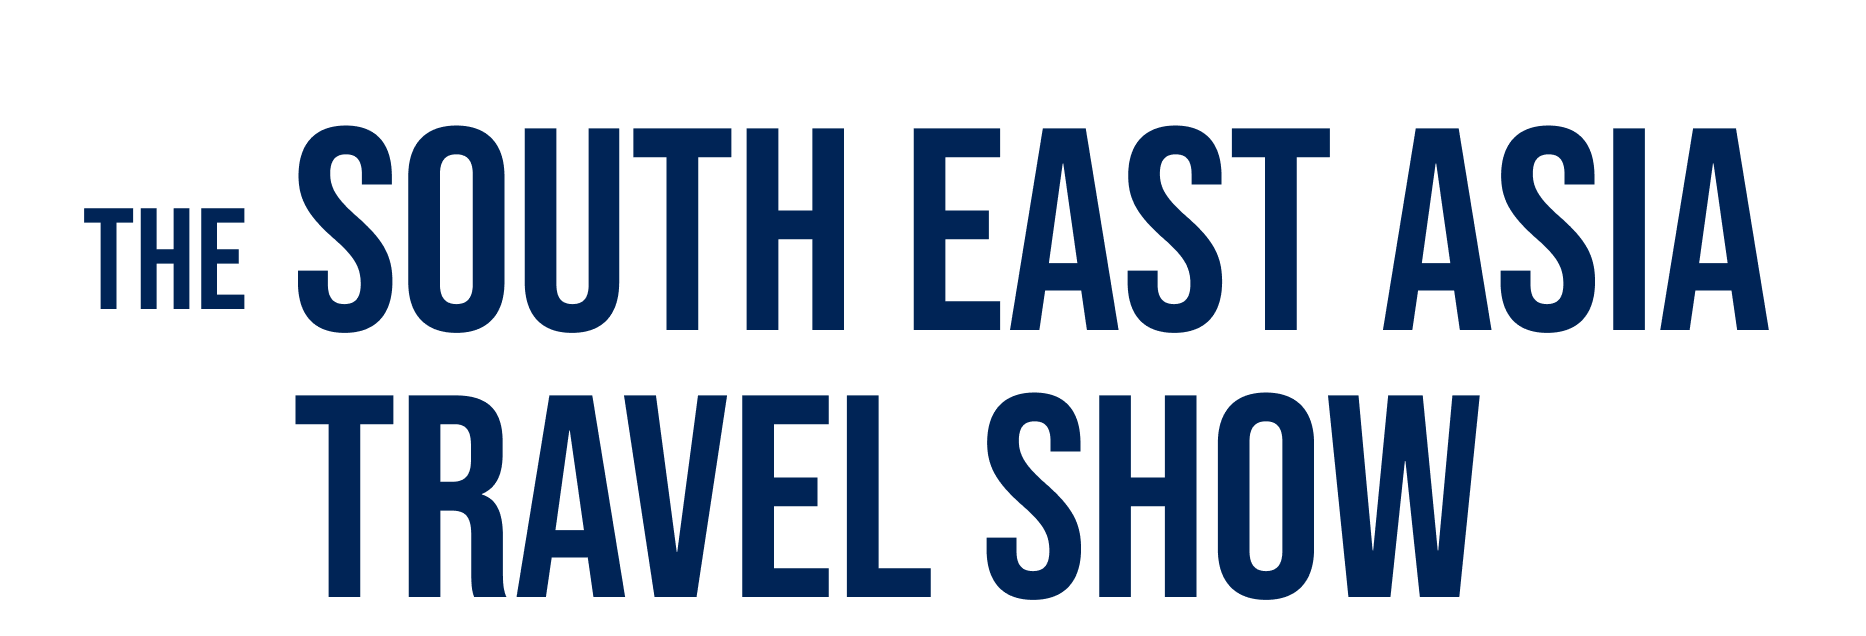 The South East Asia Travel Show